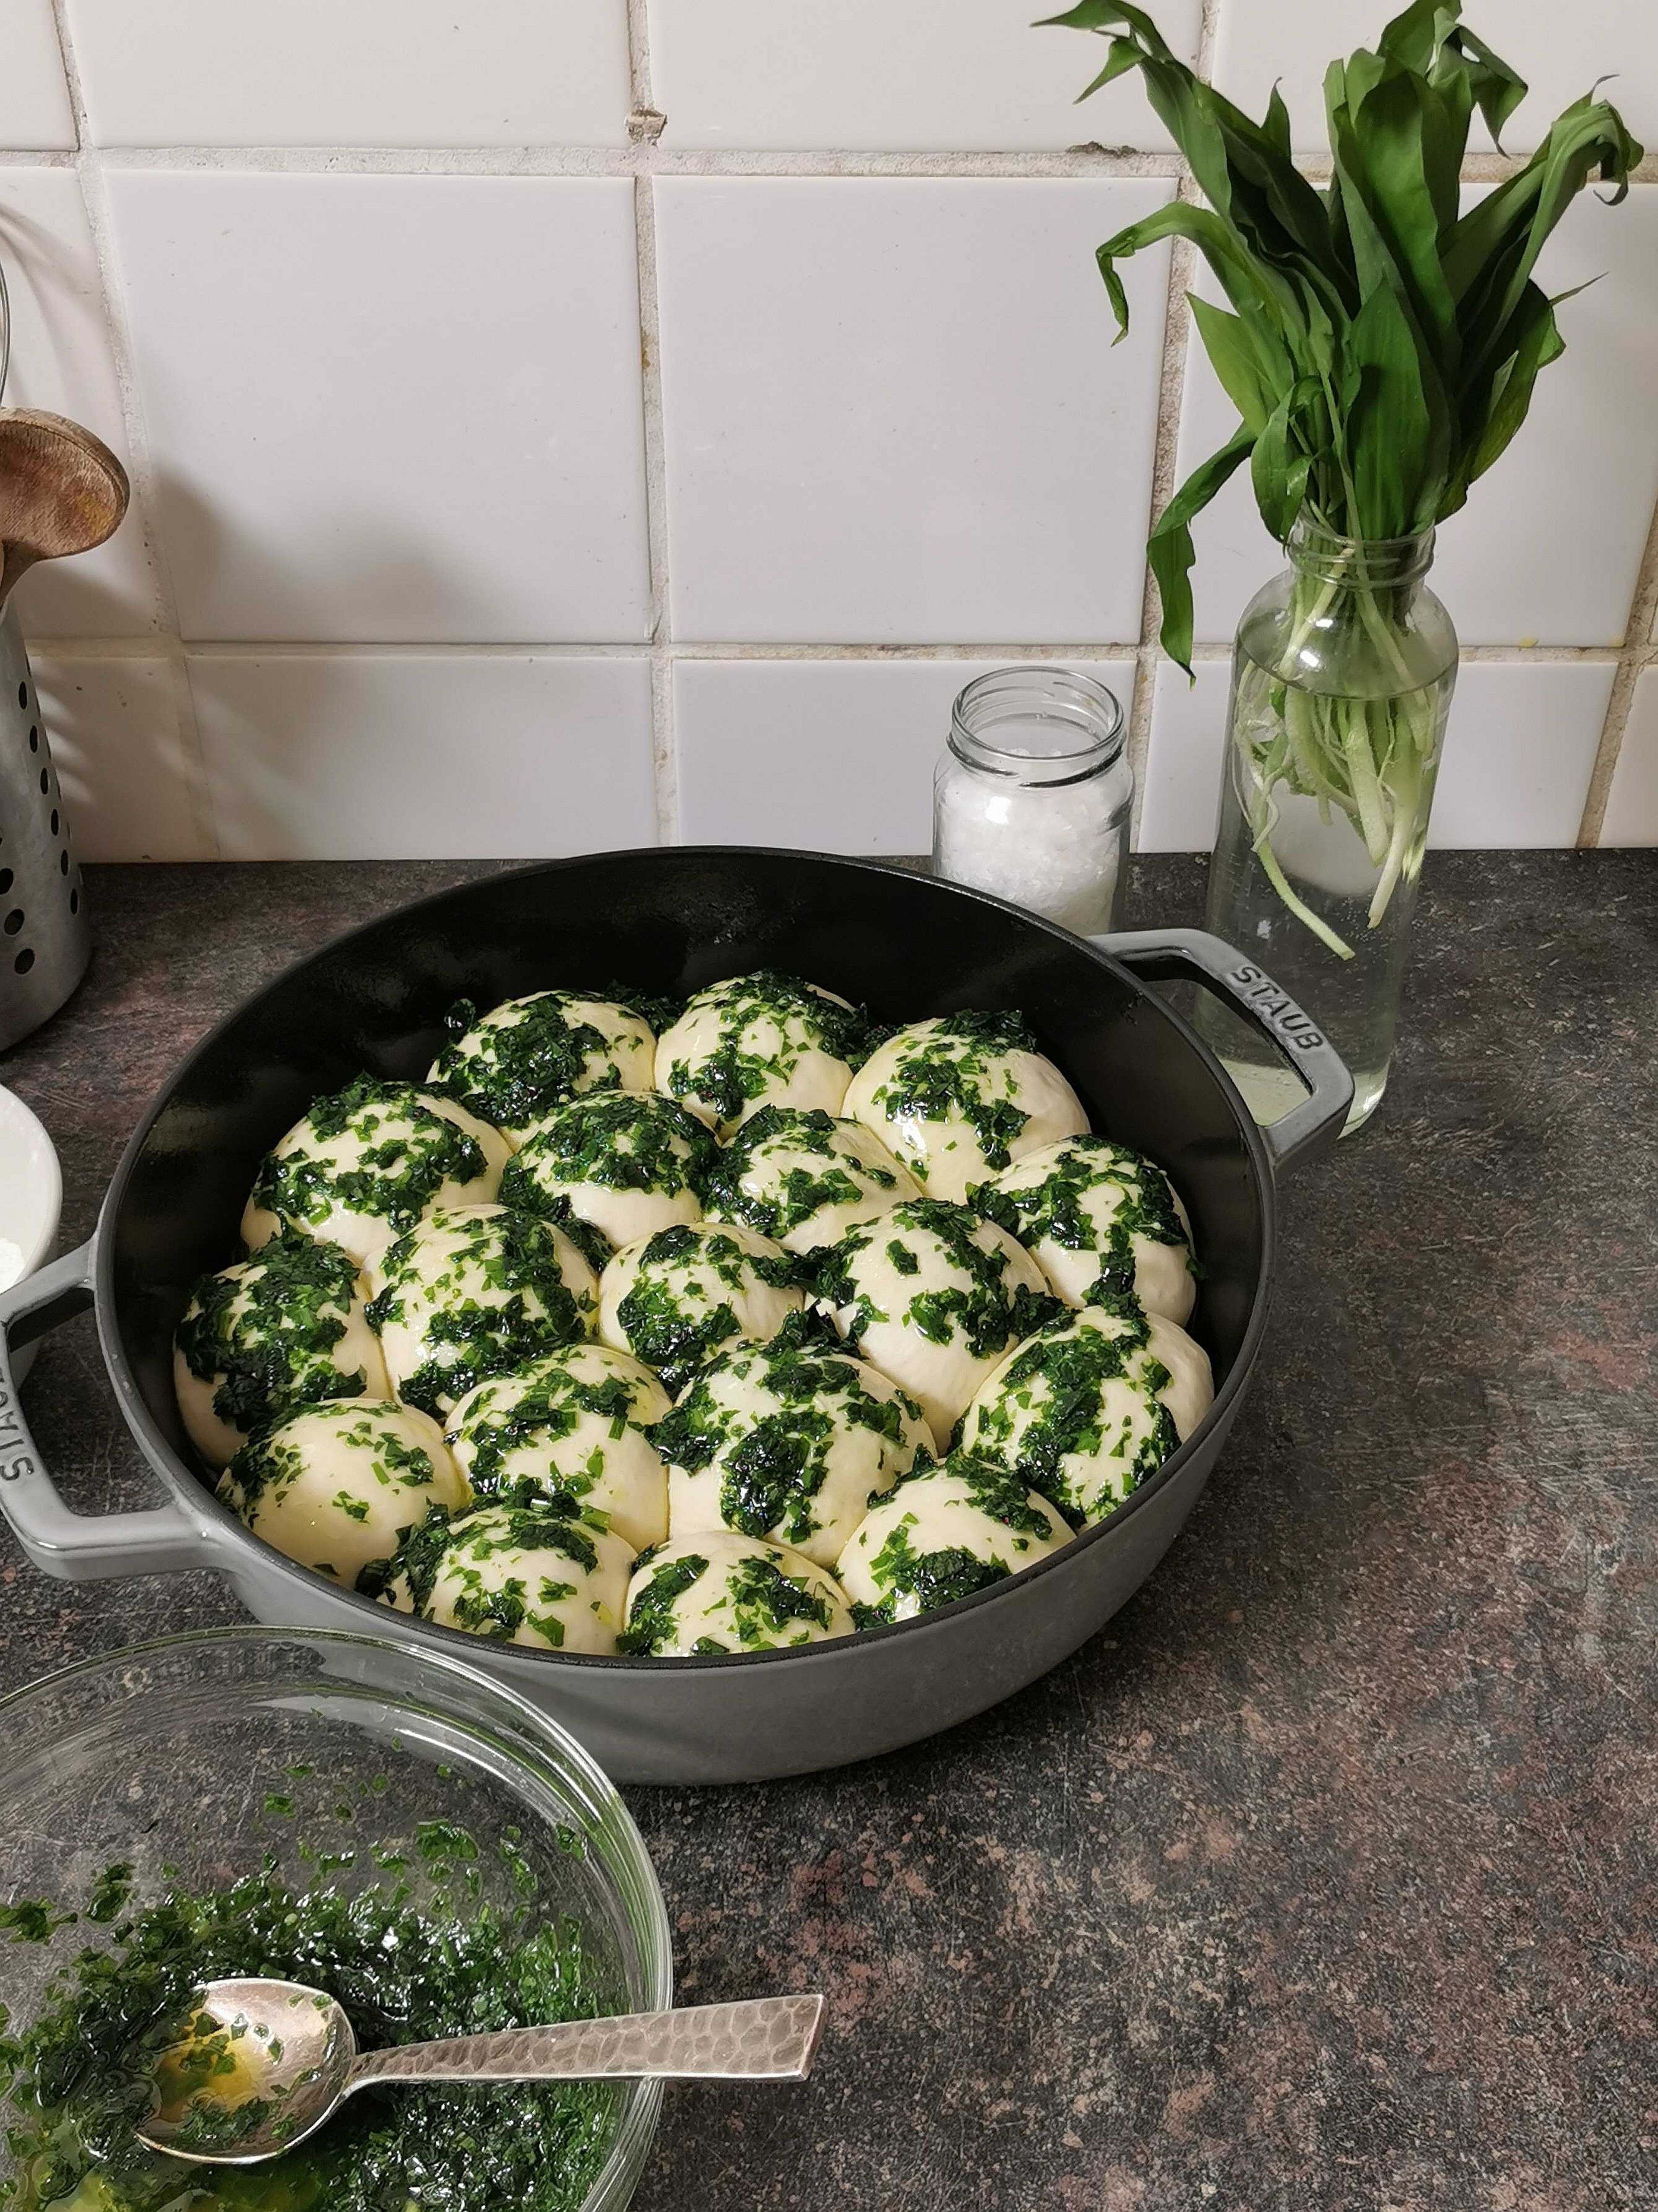 Preheat the oven to 200°C/390°F. Brush the balls generously with about 2/3 of the wild garlic oil. Transfer pan to the oven and bake for approx. 20 - 25 min., or until golden brown. Remove from the oven, brush with the remaining wild garlic oil, and serve. Enjoy!